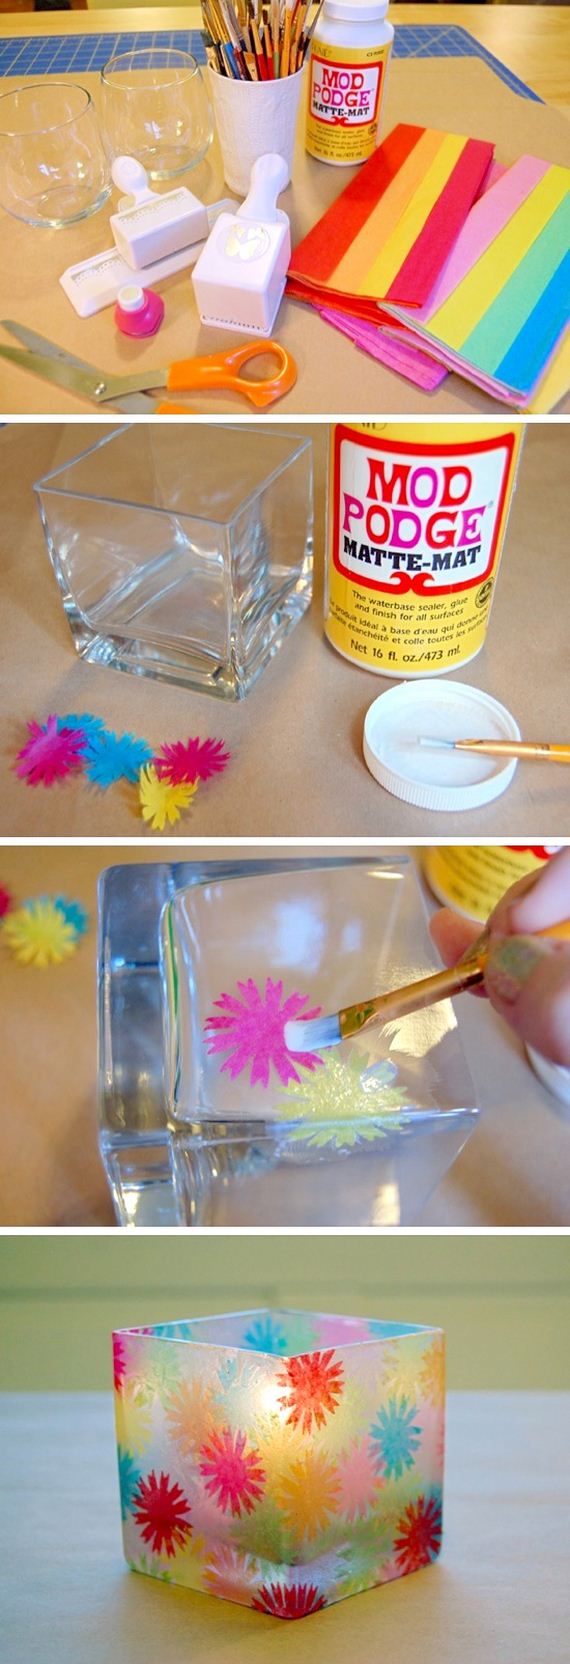 03-instant-and-fun-easy-diy-craft-projects-to-do-at-home